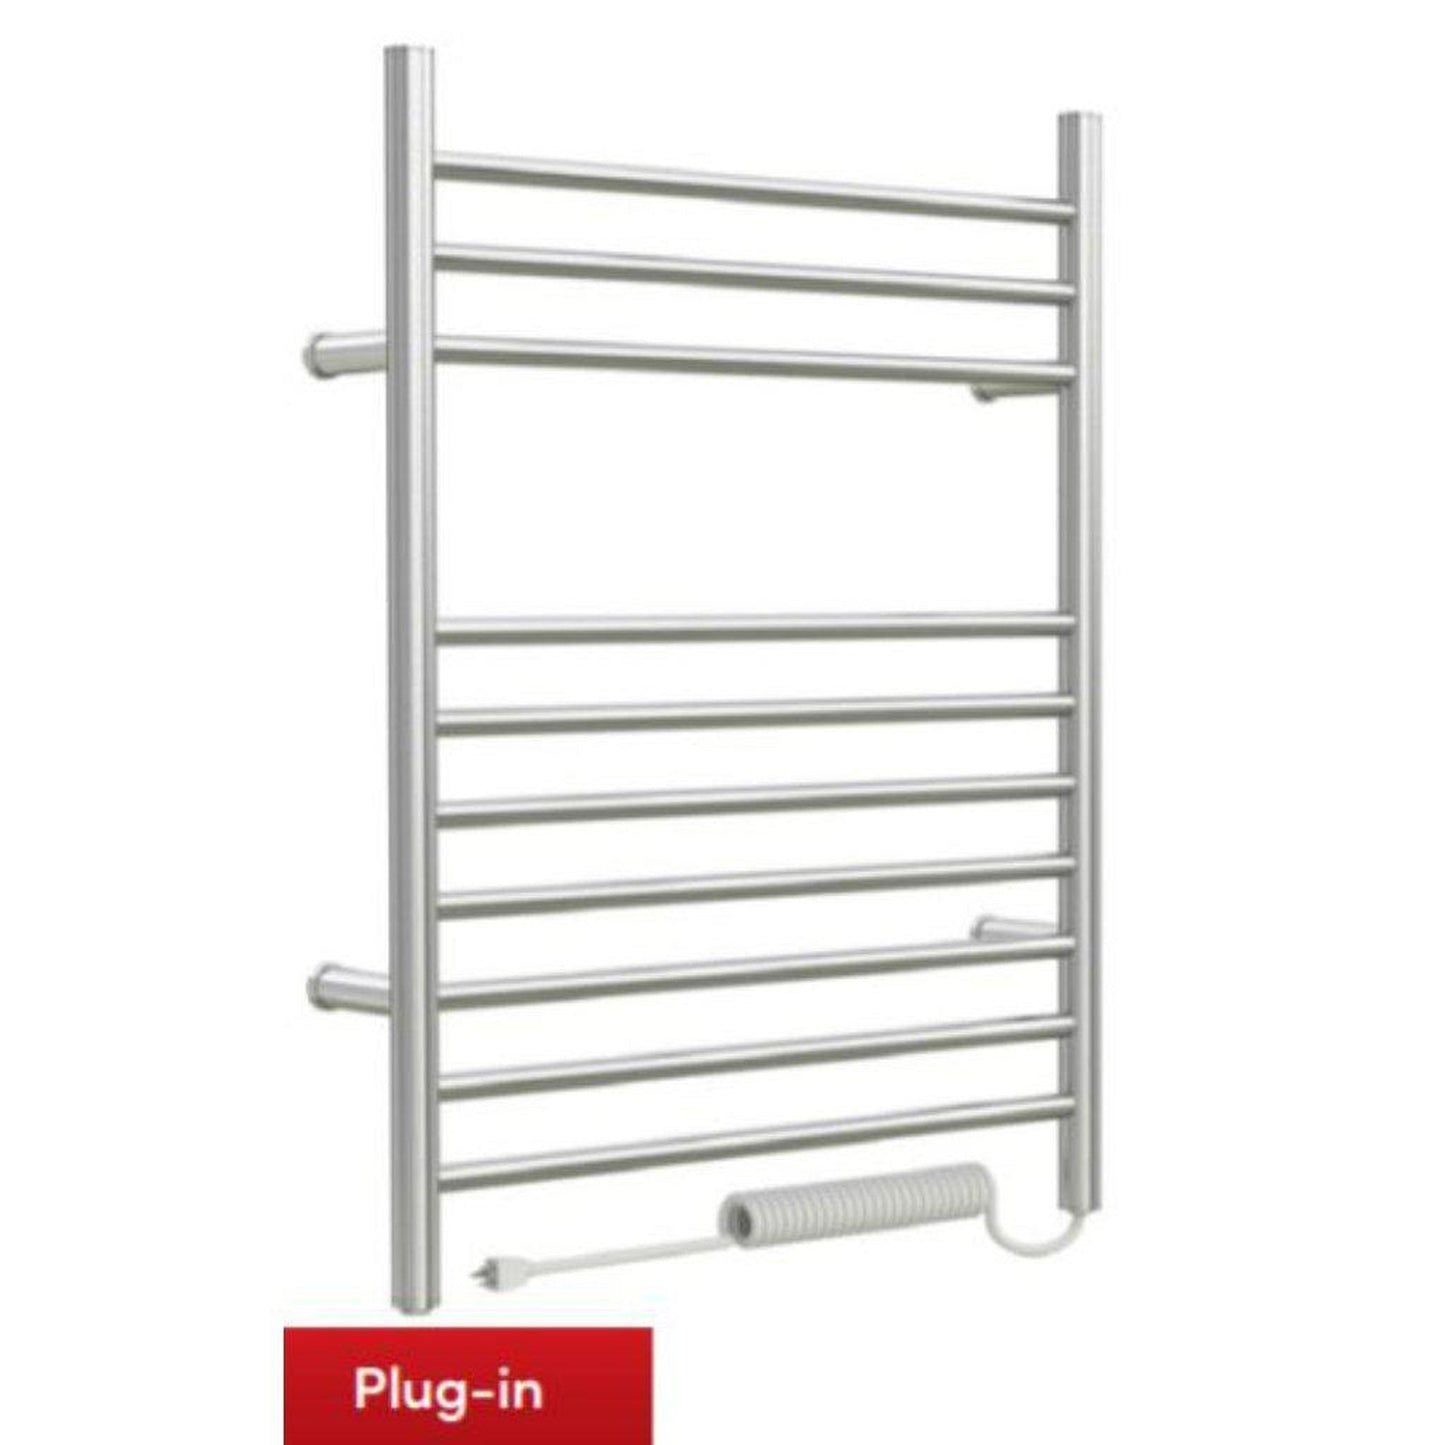 WarmlyYours Infinity 24" x 32" Brushed Stainless Steel Wall-Mounted 10-Bar Plug-In Towel Warmer